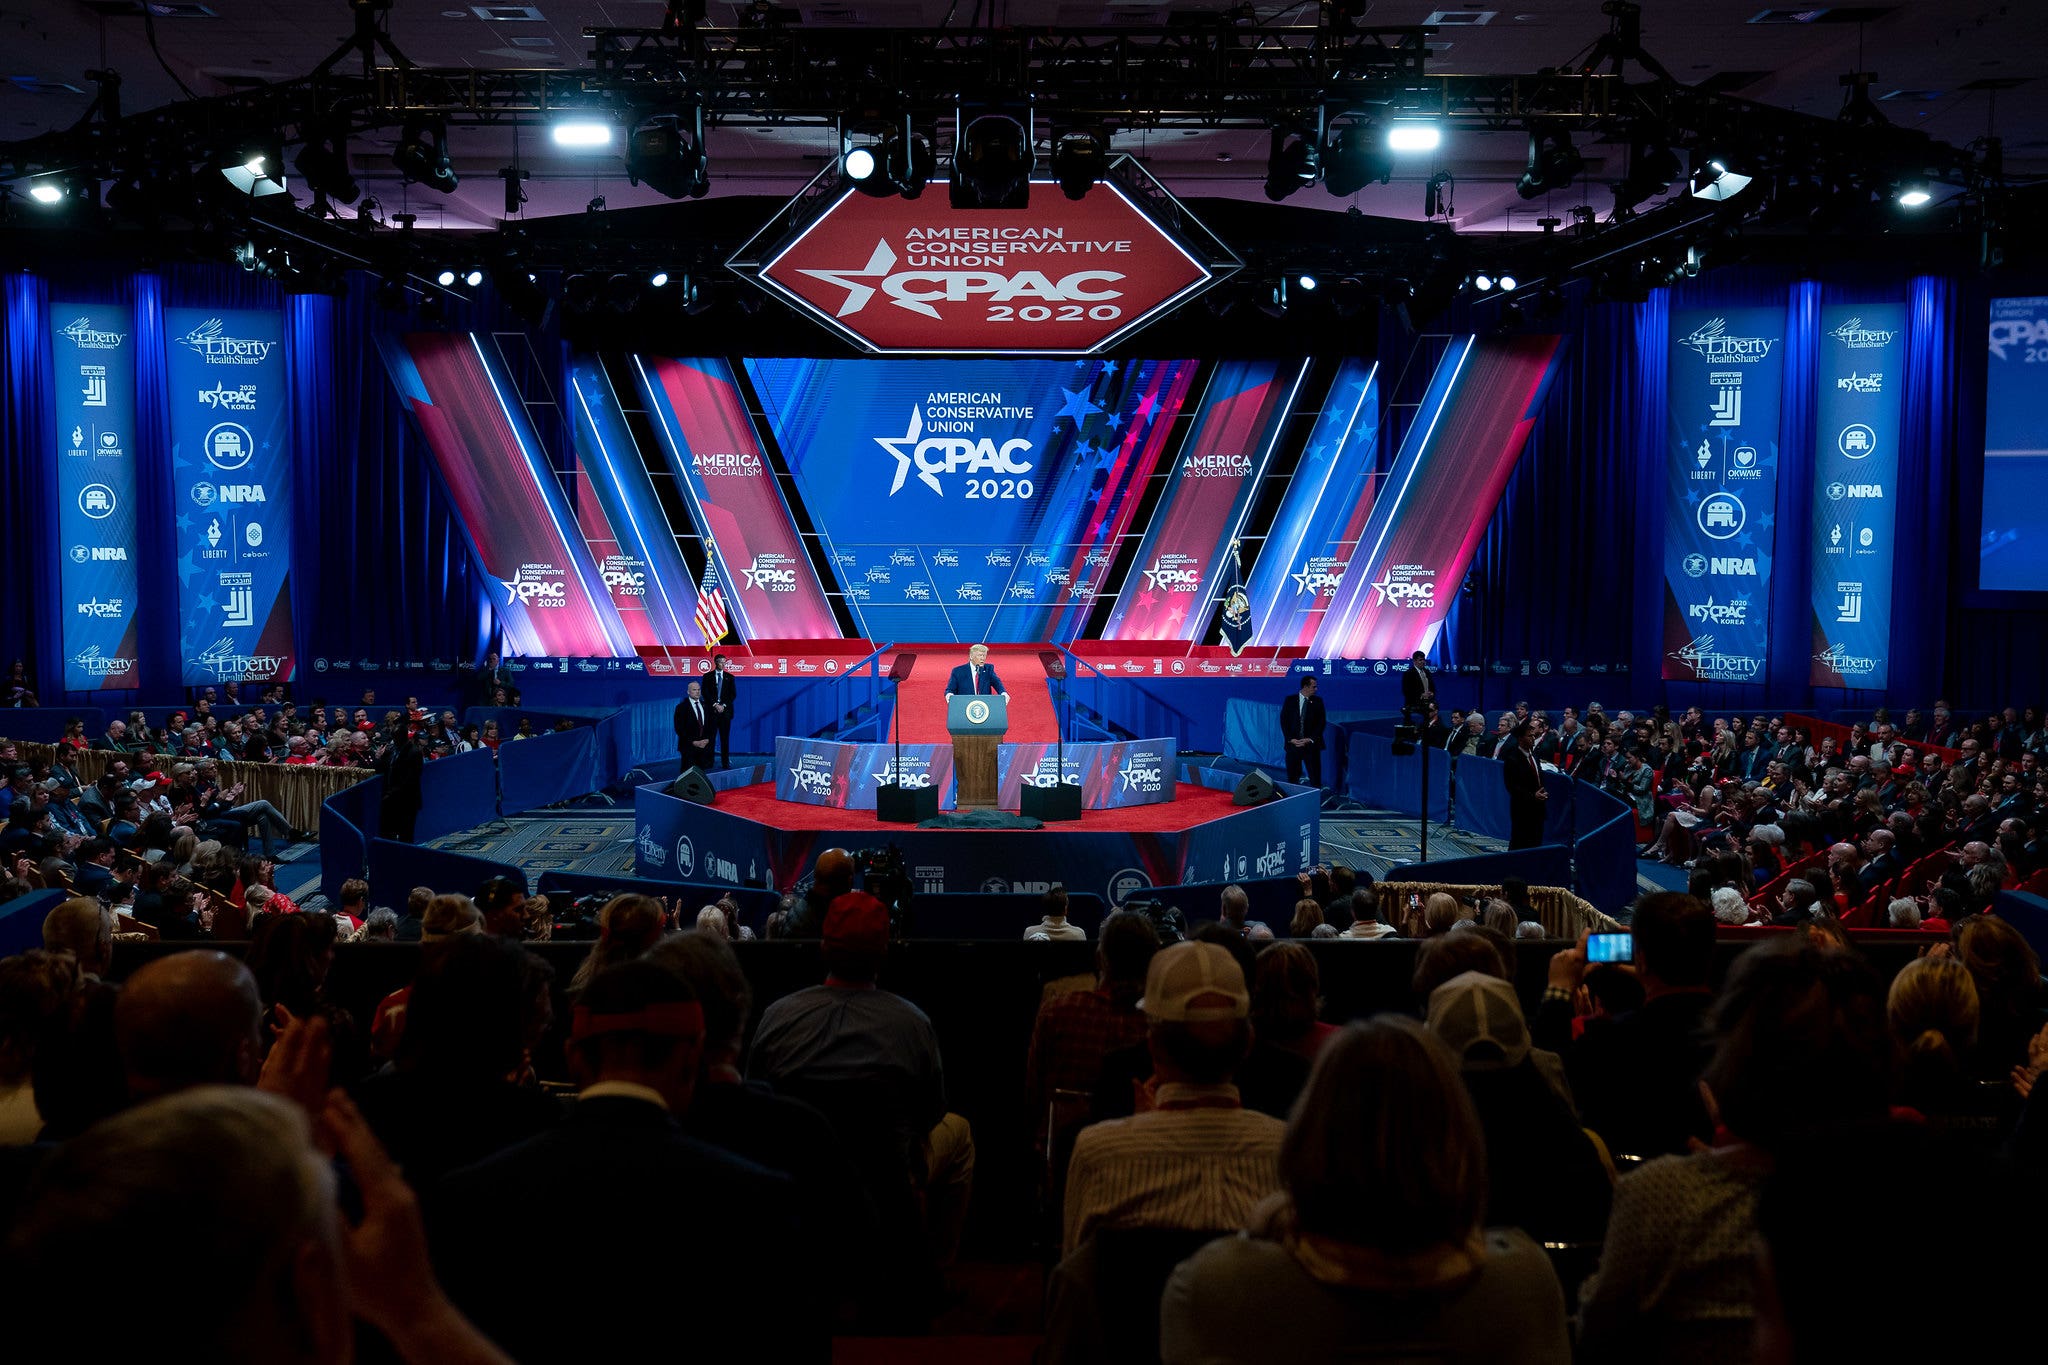 CPAC organizers accuse Politico of trying to ‘cancel’ conservative events with ‘misleading’ claims on sponsors